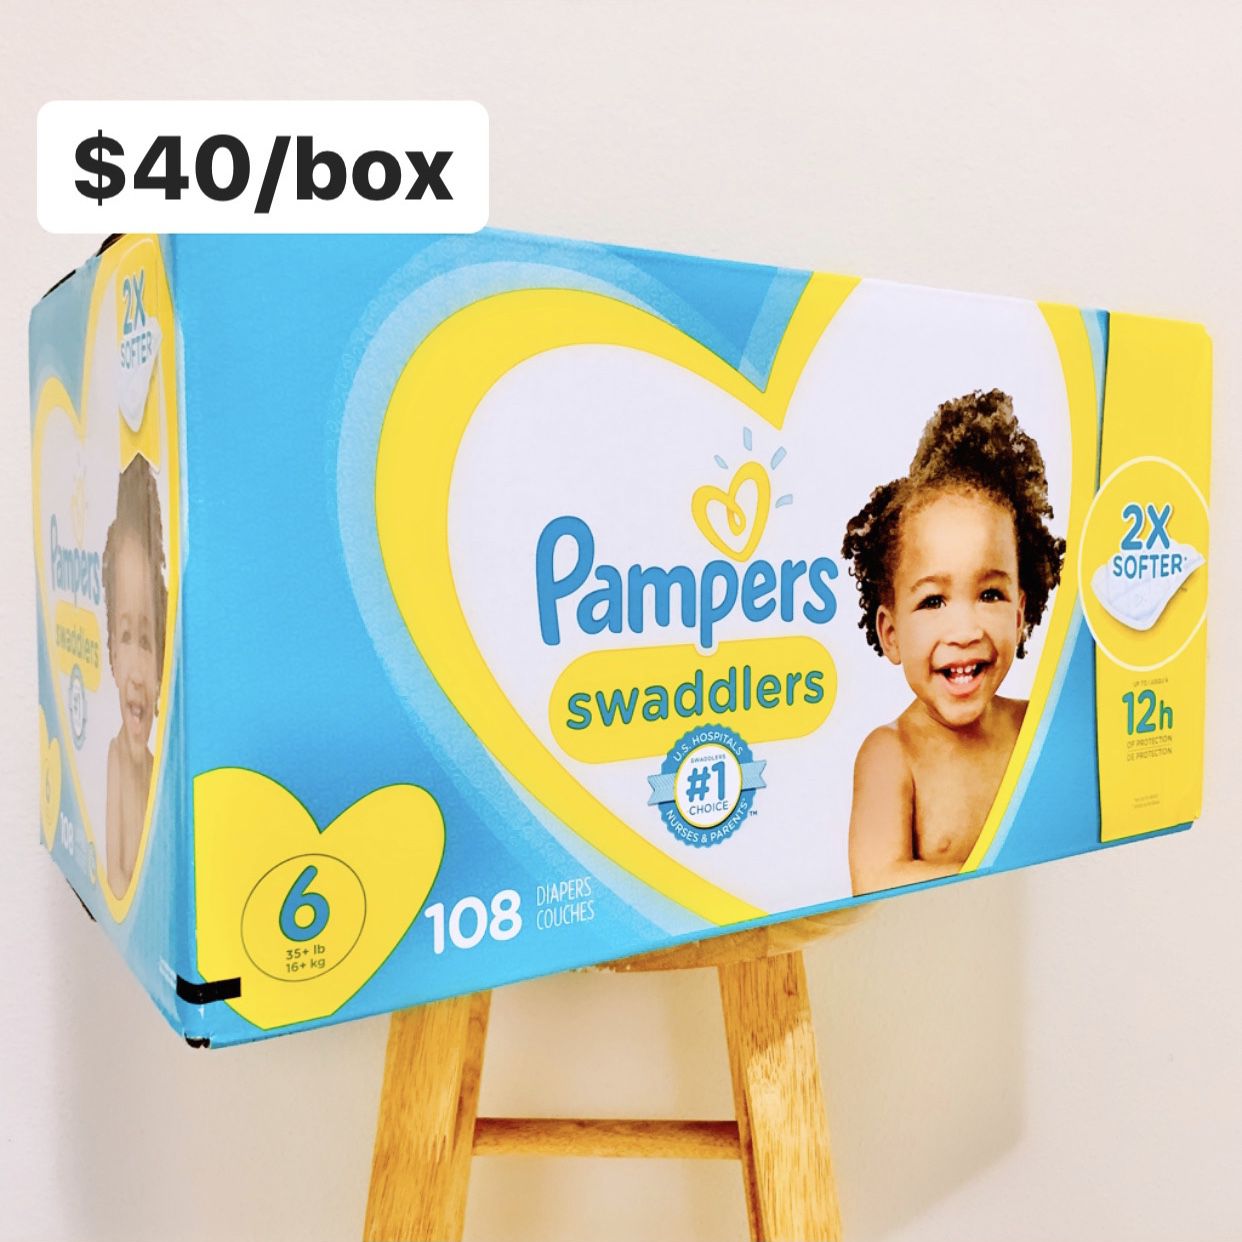 Size 6 (35+ lbs) Pampers Swaddlers (108 baby diapers) *PROMO* BUY ANY 2 PAMPERS BRAND BIG BOXES, GET 1 FREE HUGGIES TUB 64ct